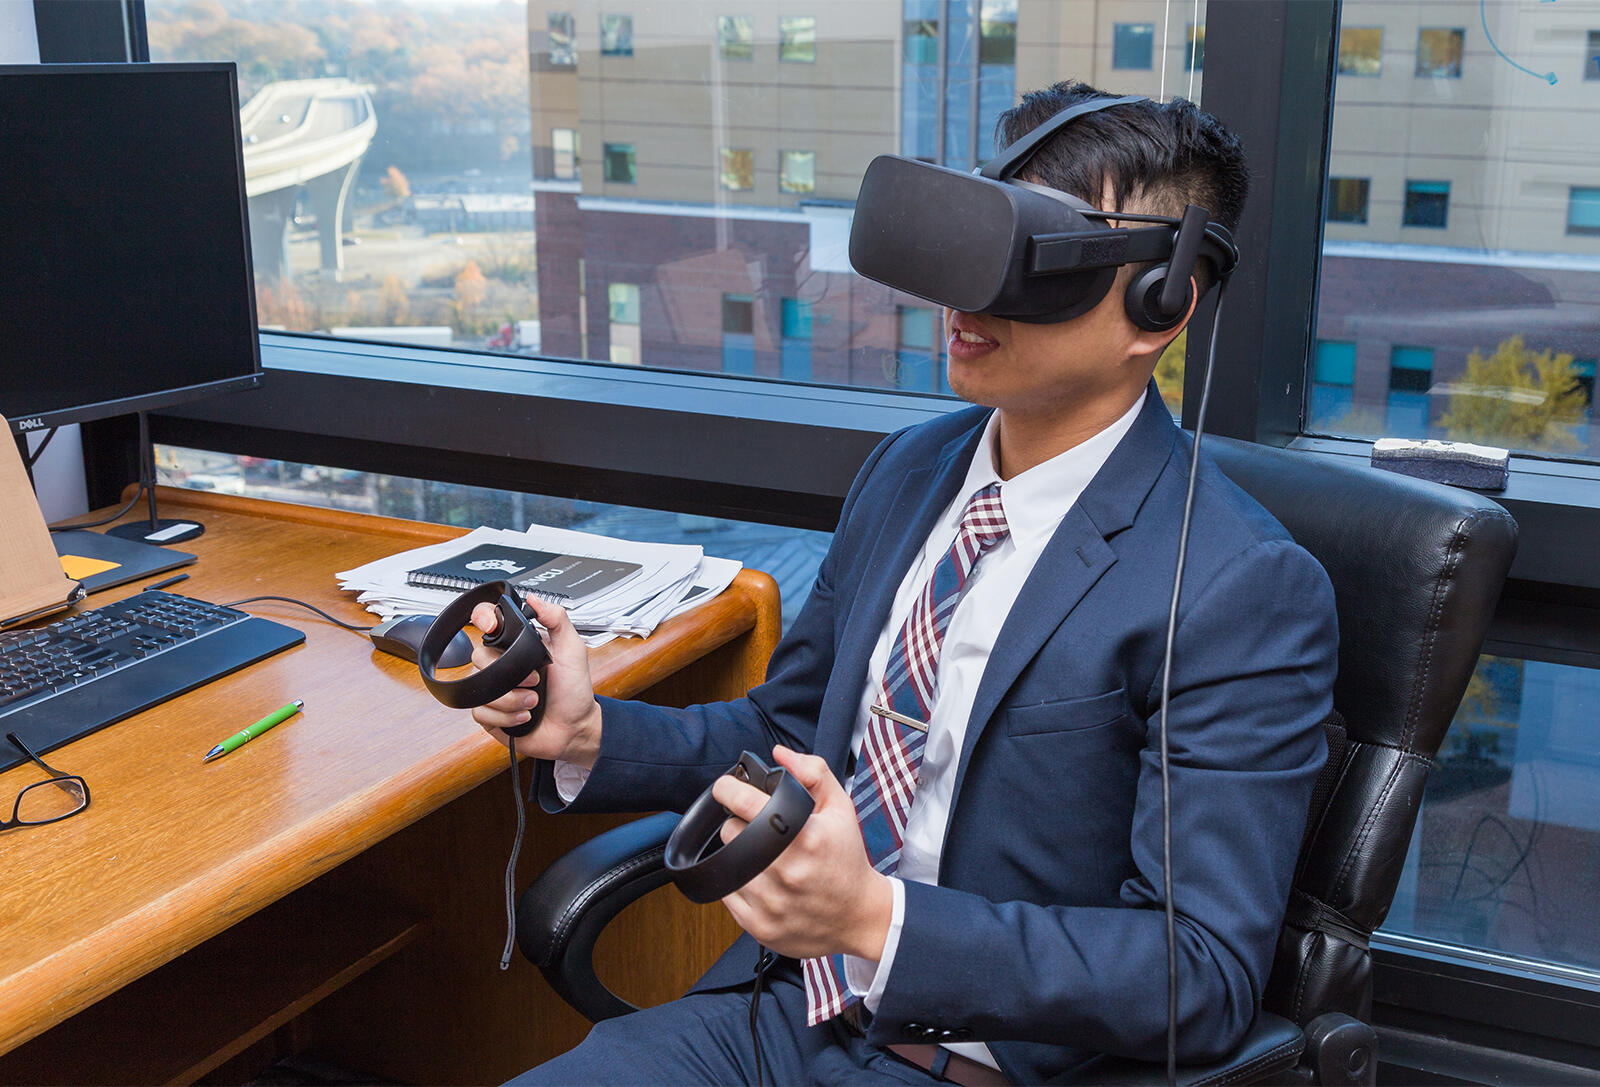 David Vu, a fourth-year doctoral candidate in the School of Pharmacy, created an app, AnyWear VR, that is meant to help reduce anxiety for children with autism spectrum disorder and make them more comfortable in healthcare situations. Contributed photo.